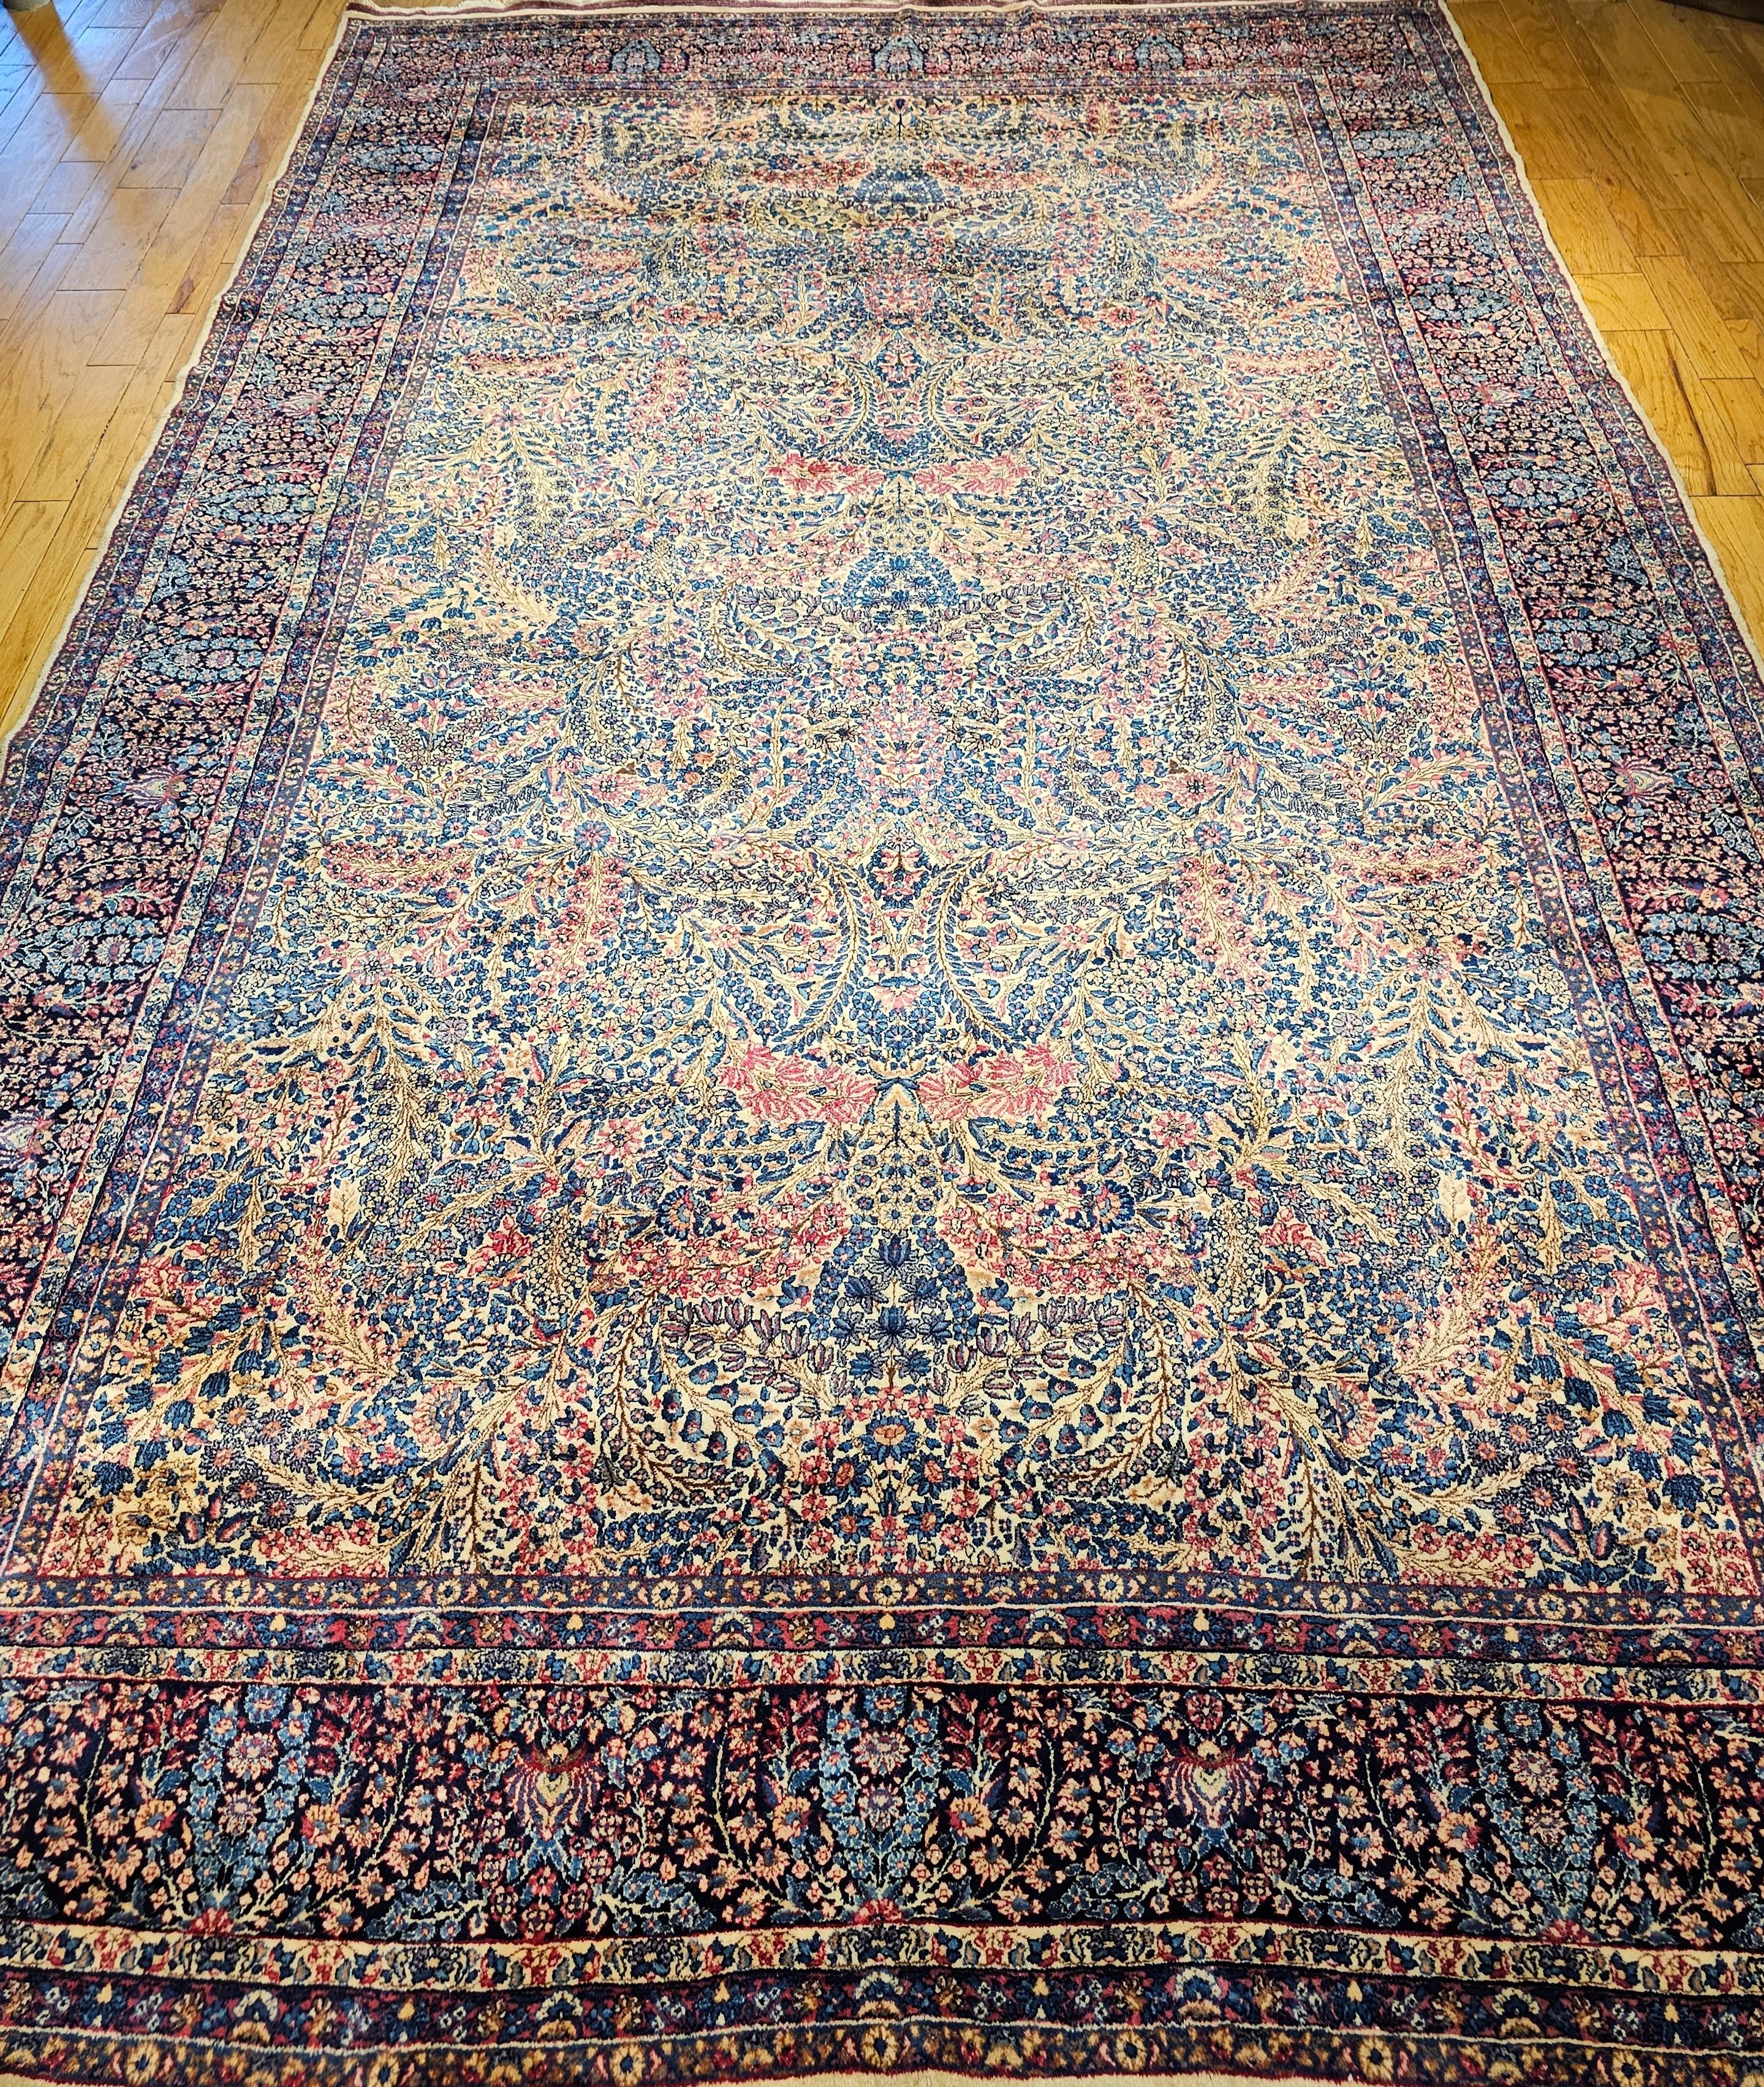 A majestic Kerman Lavar rug from the renowned village of Lavar in Southwest Persian.   The Kerman Lavar rug was handwoven in one of the finest workshops during the first quarter of the 1900s.  It has a beautiful 